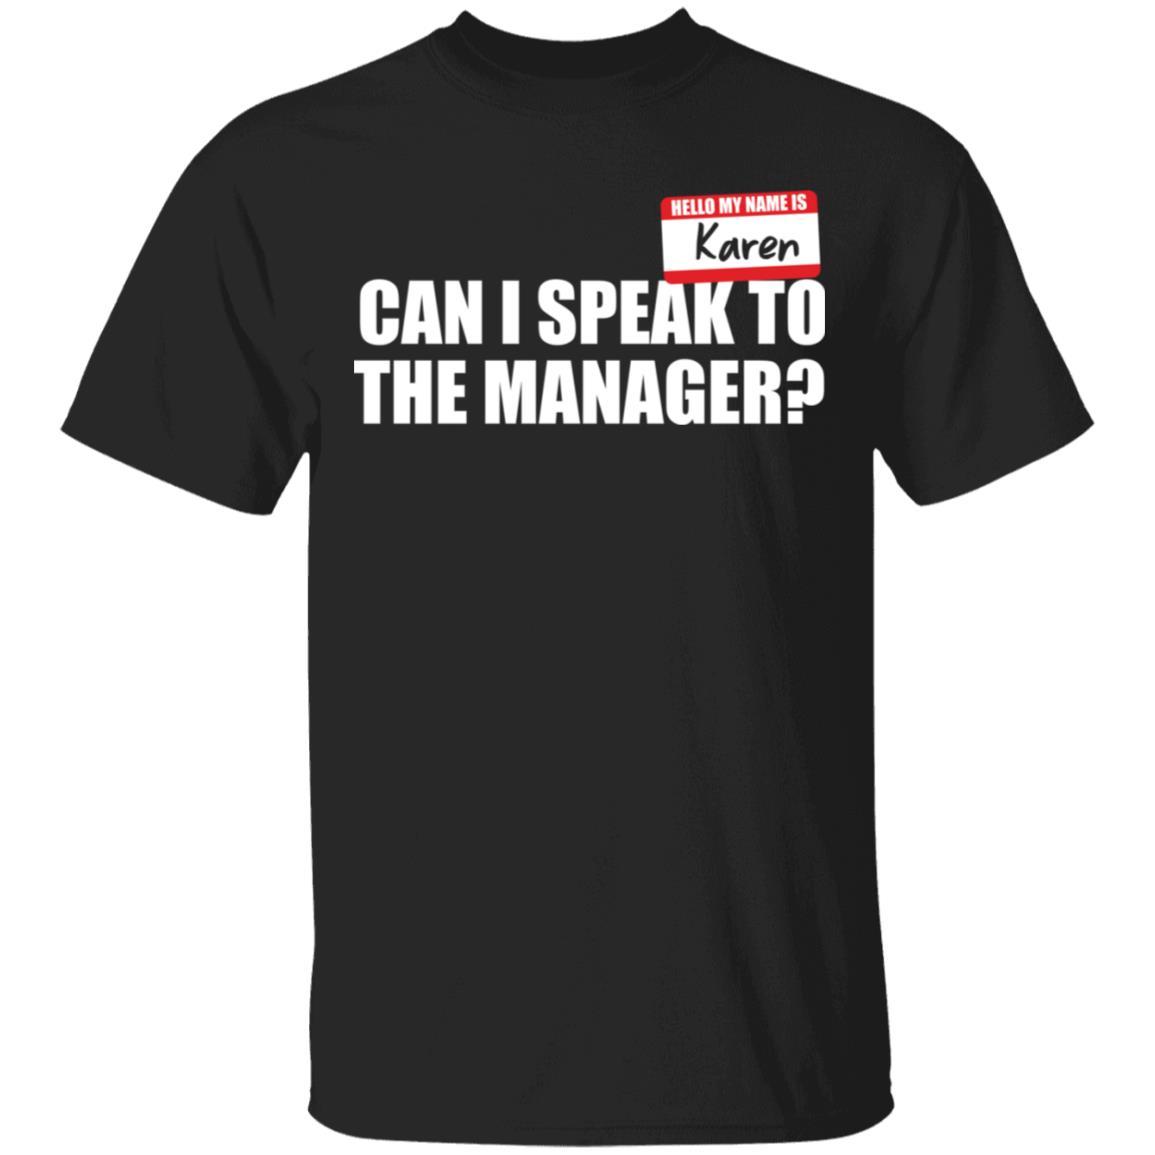 My Name Is Karen Can I Speak To The Manager shirt